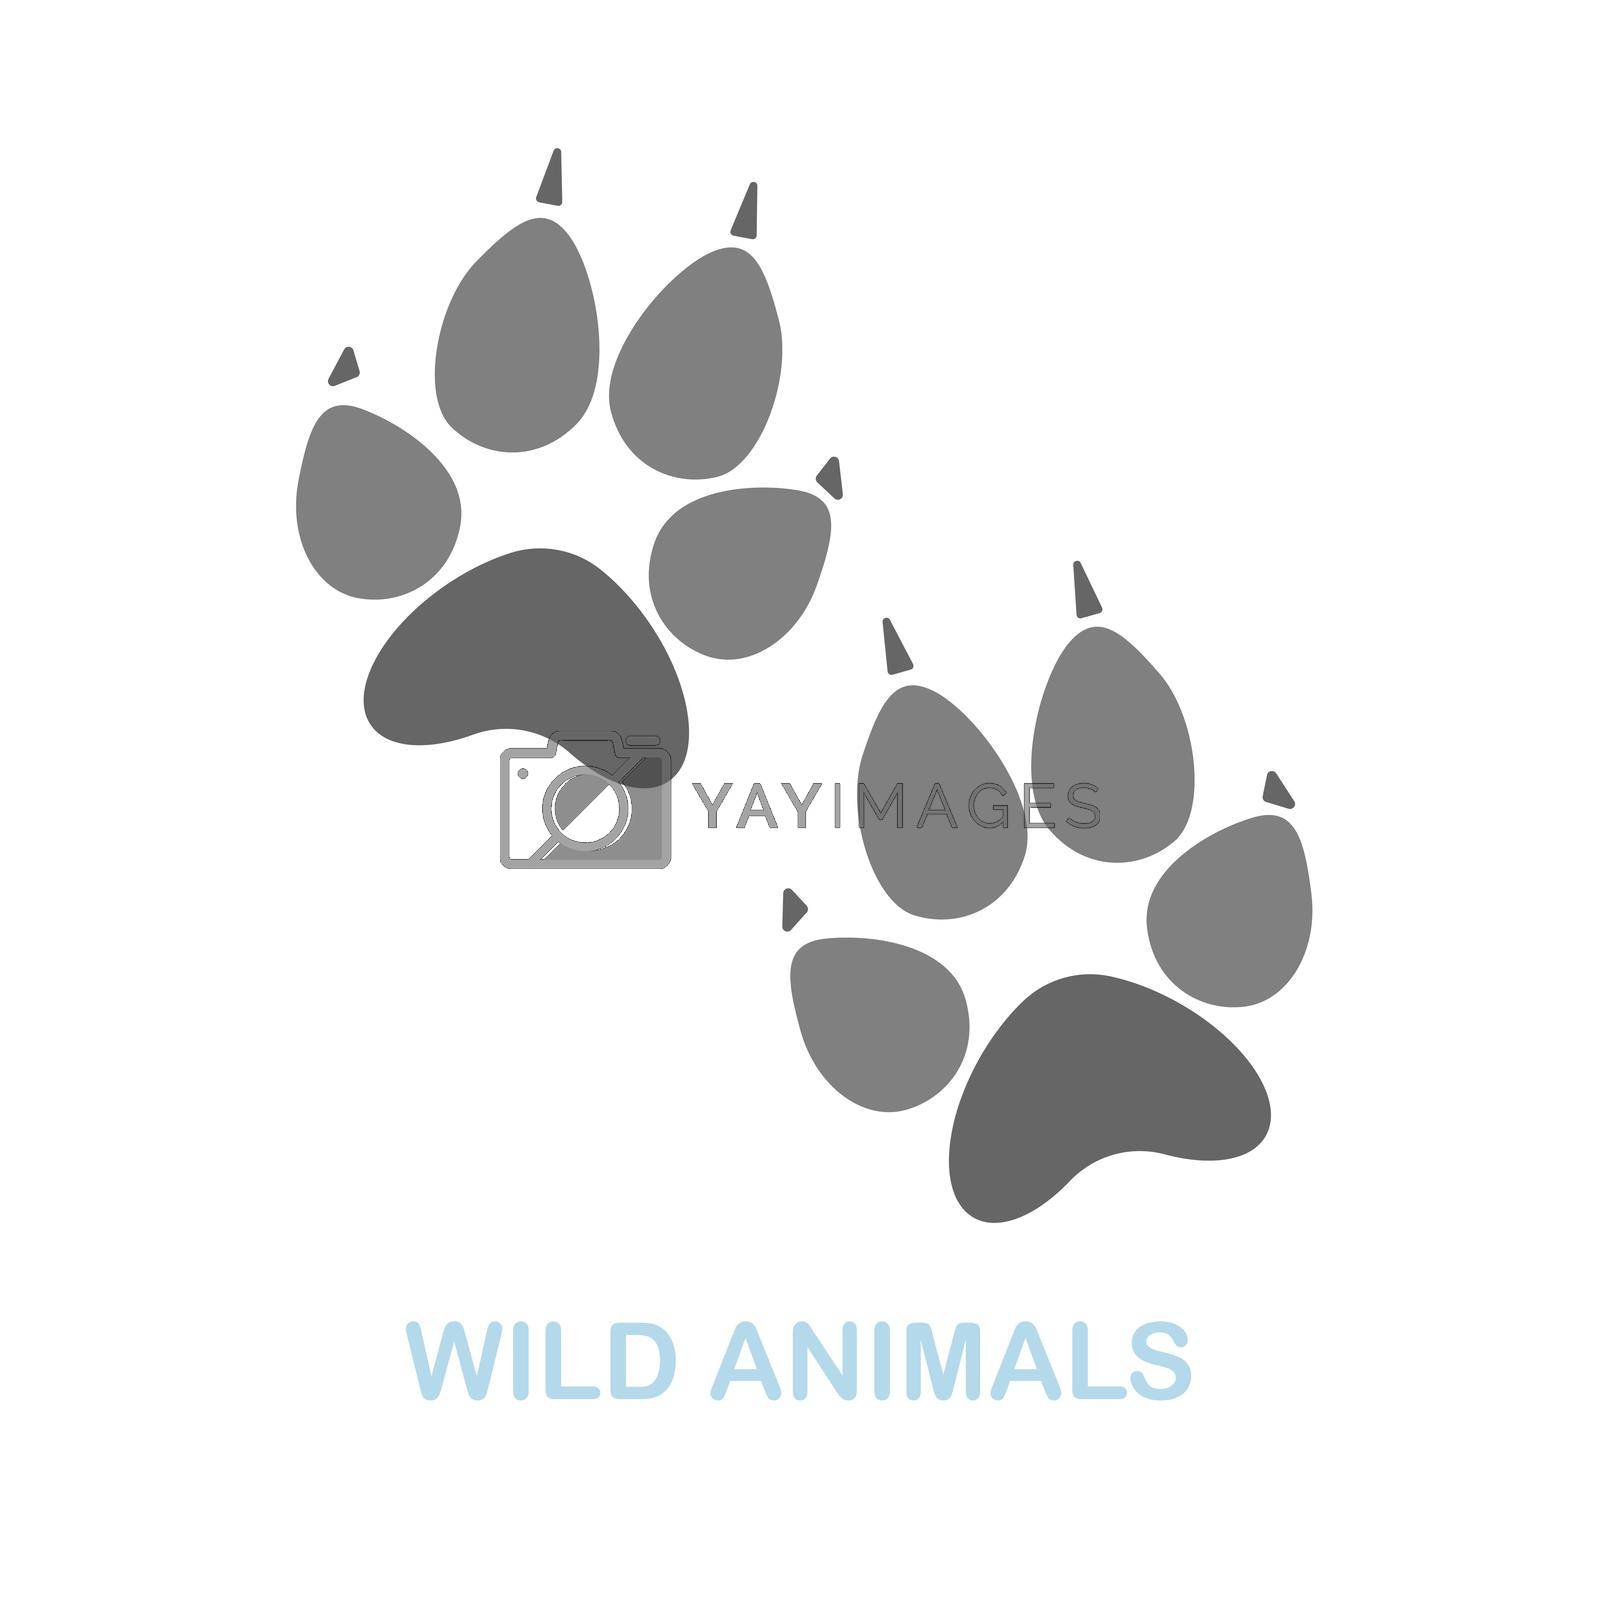 Wild Animals flat icon. Simple colors elements from wild animals collection. Flat Wild Animals icon for graphics, wed design and more.